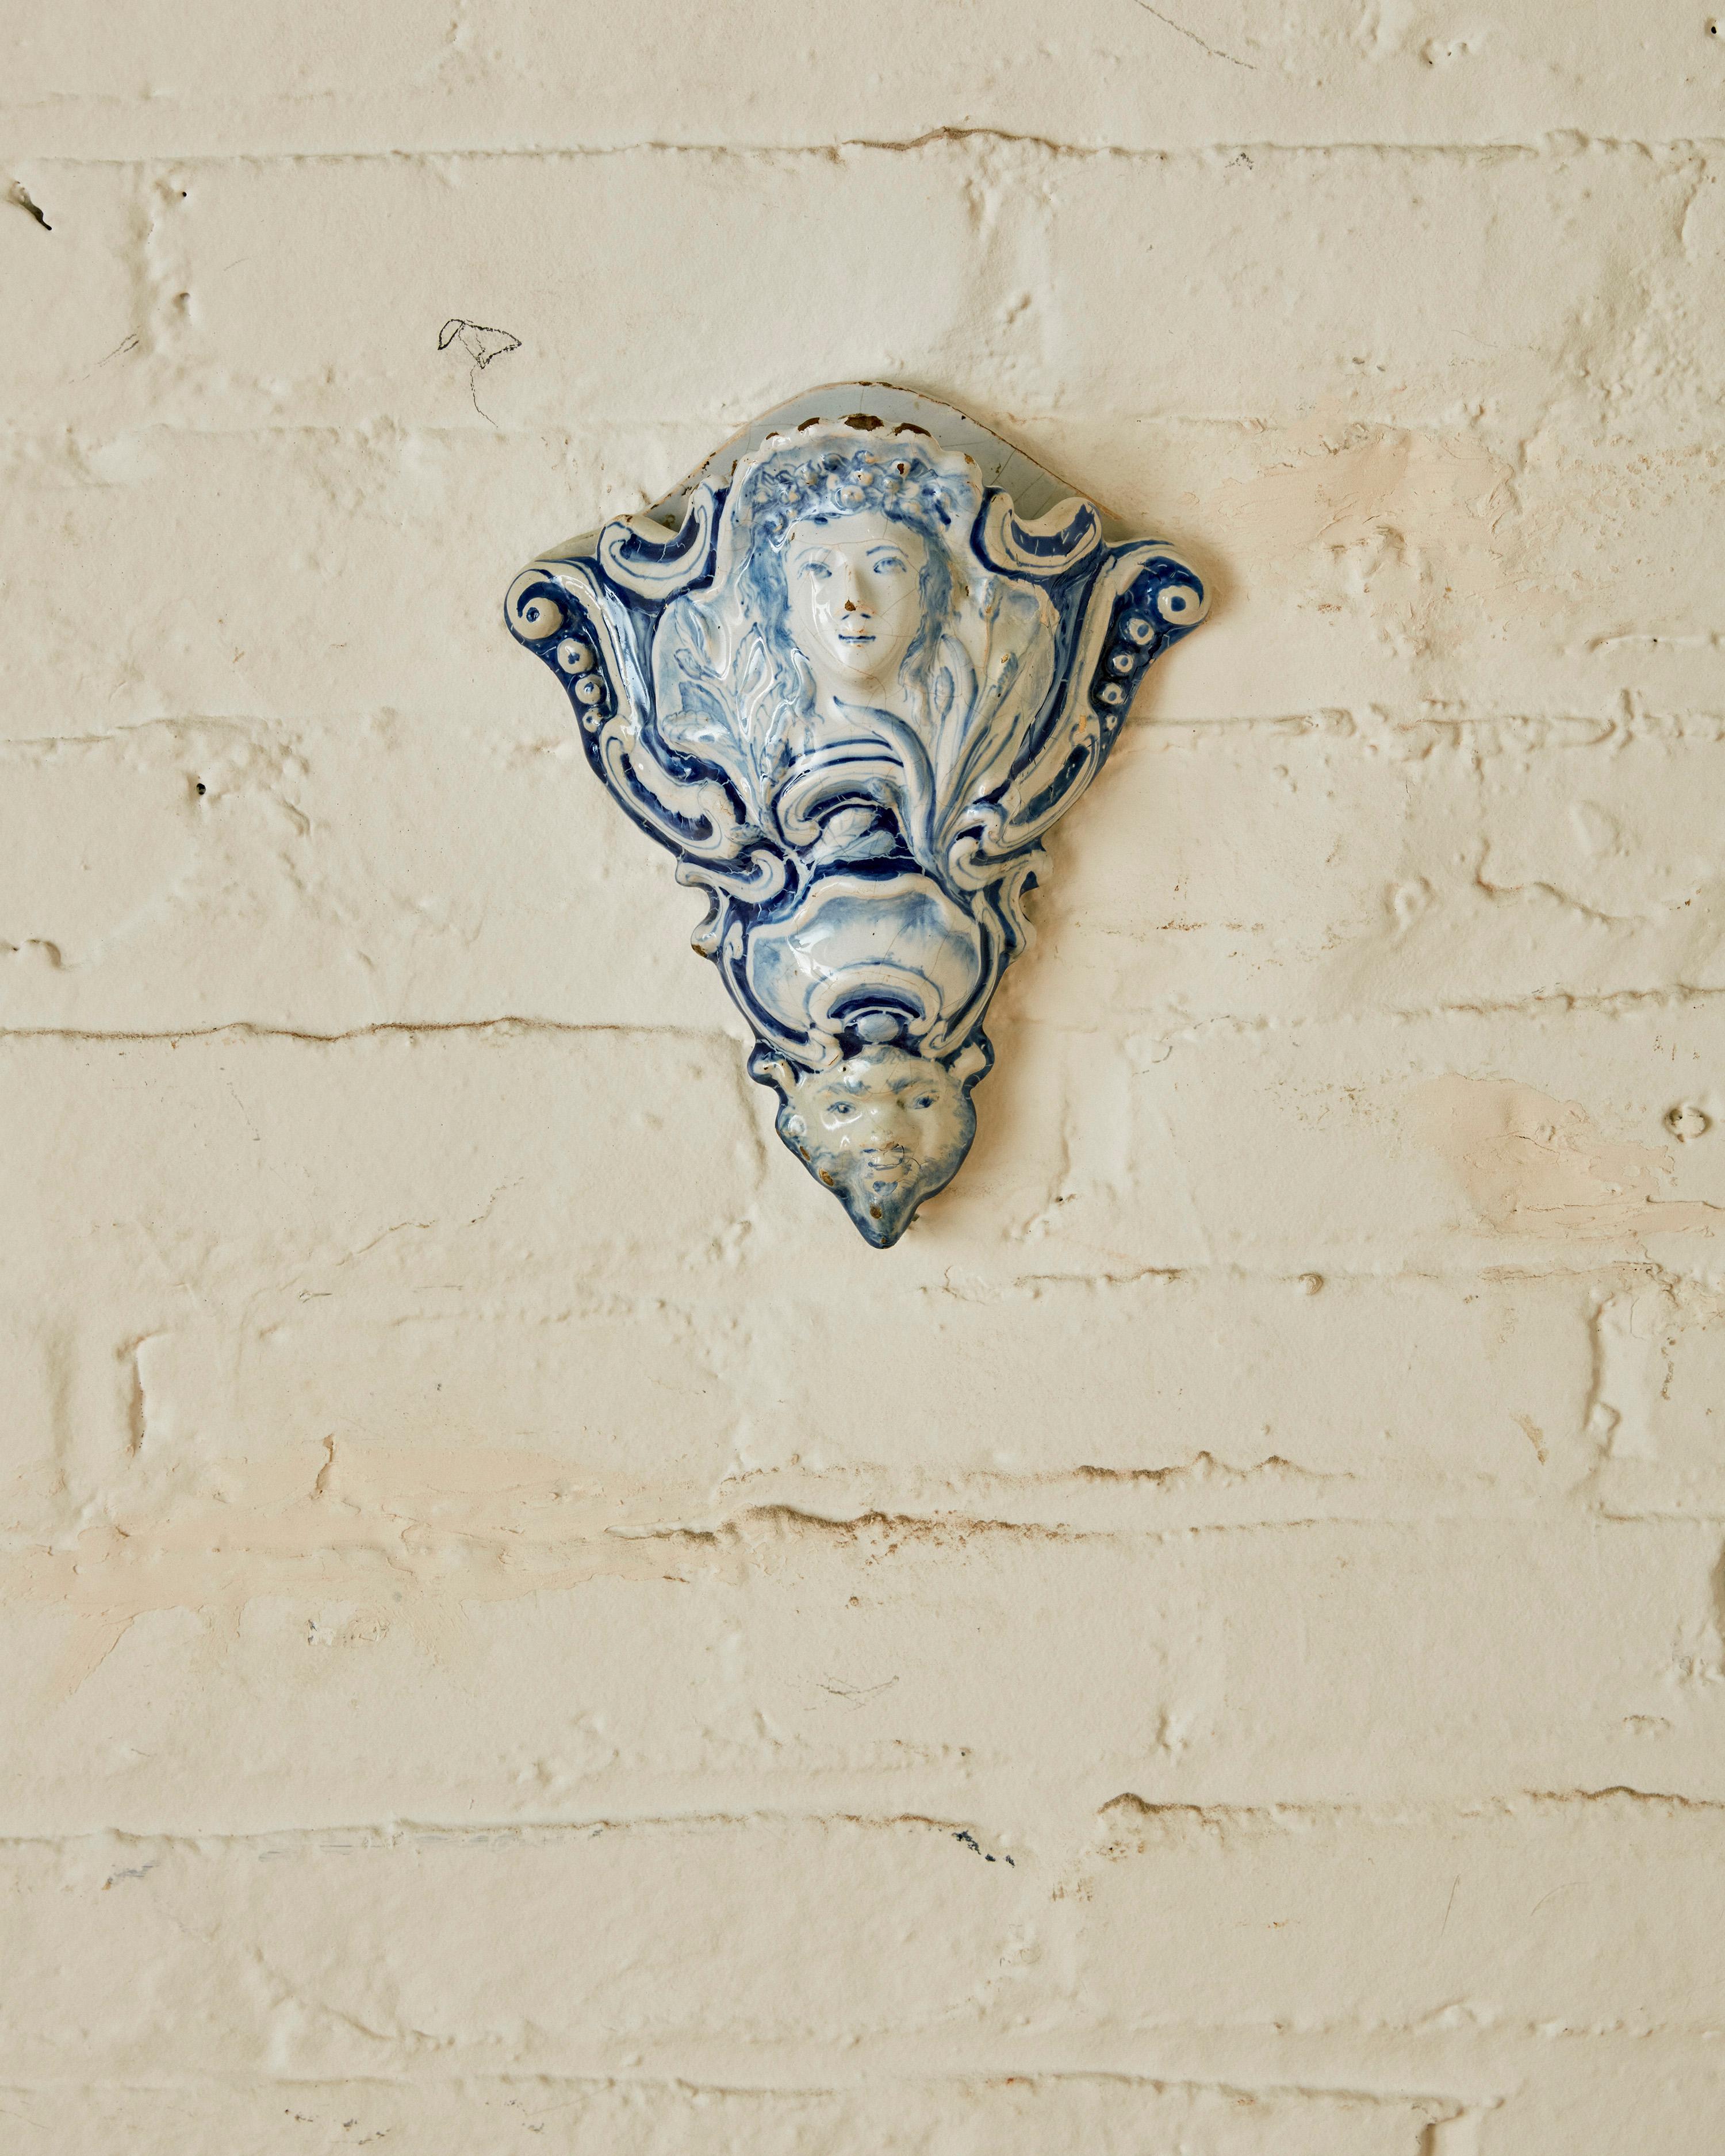 Blue and White Glazed Ceramic Delft Wall Pocket, depicting a floral mask on the top half and another on the bottom half.

